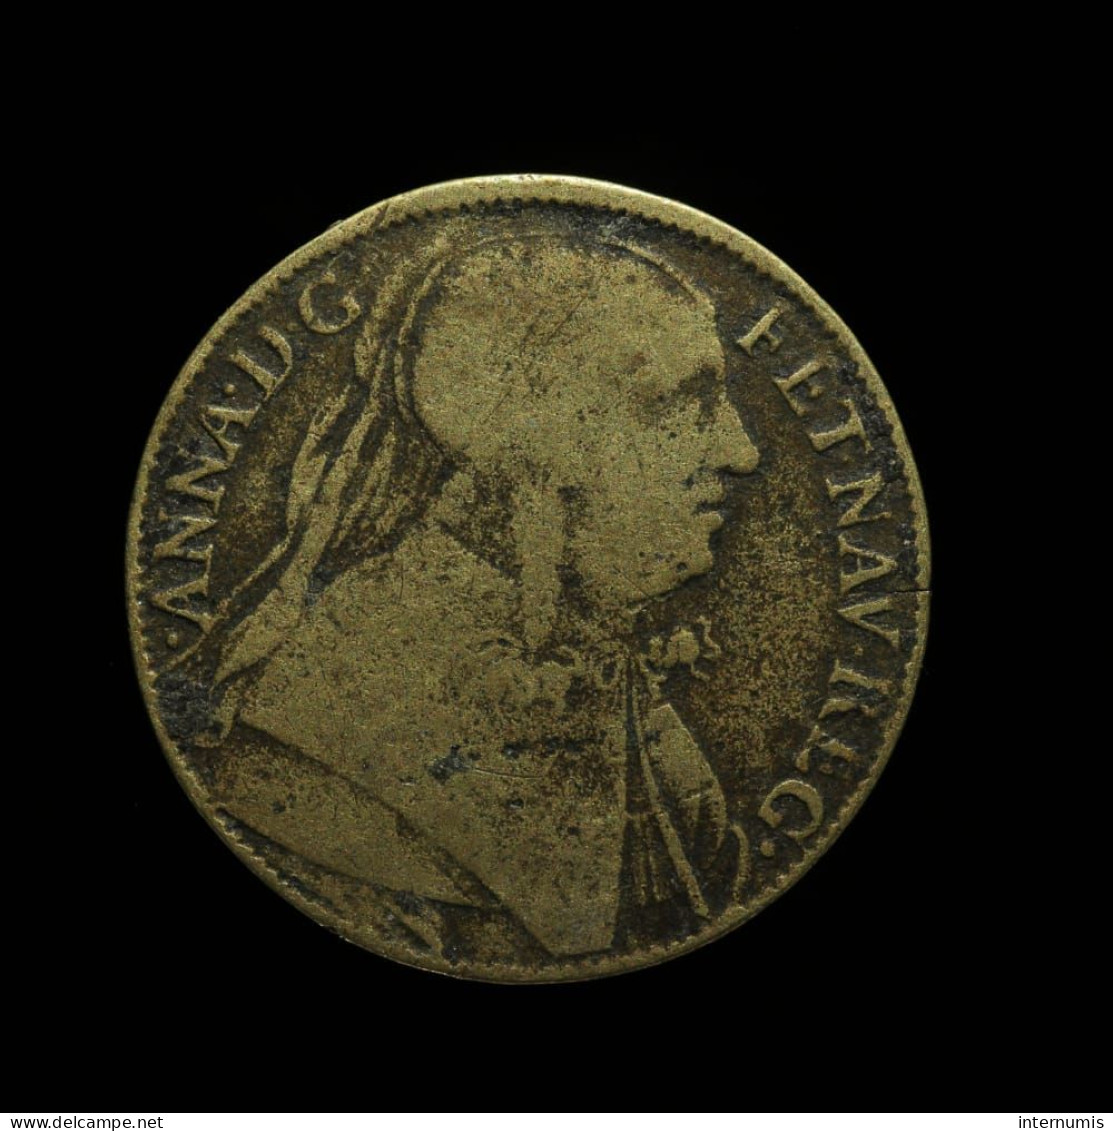 France, Anne D'Autriche, AMBO · IVNGEN TVR · IN · VNA, Laiton (Brass), TB (F), Feu#12426 - Royal / Of Nobility